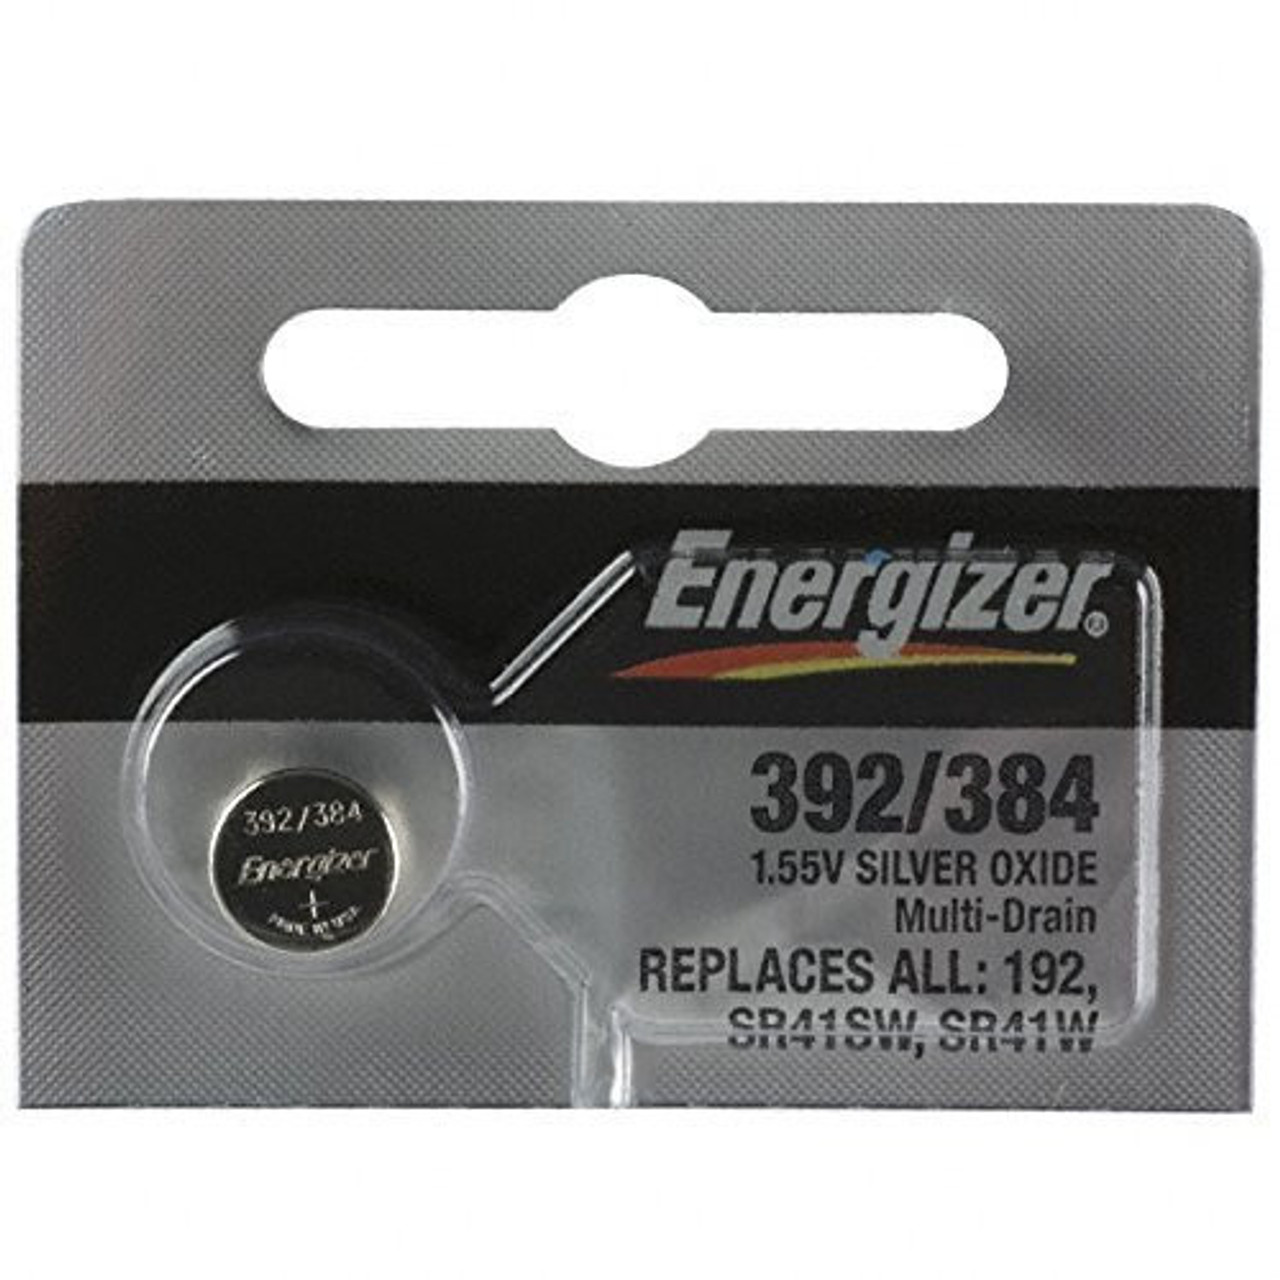 Energizer 384/392 - SR41SW Silver Oxide Button Battery 1.55V - 2 Pack FREE SHIPPING